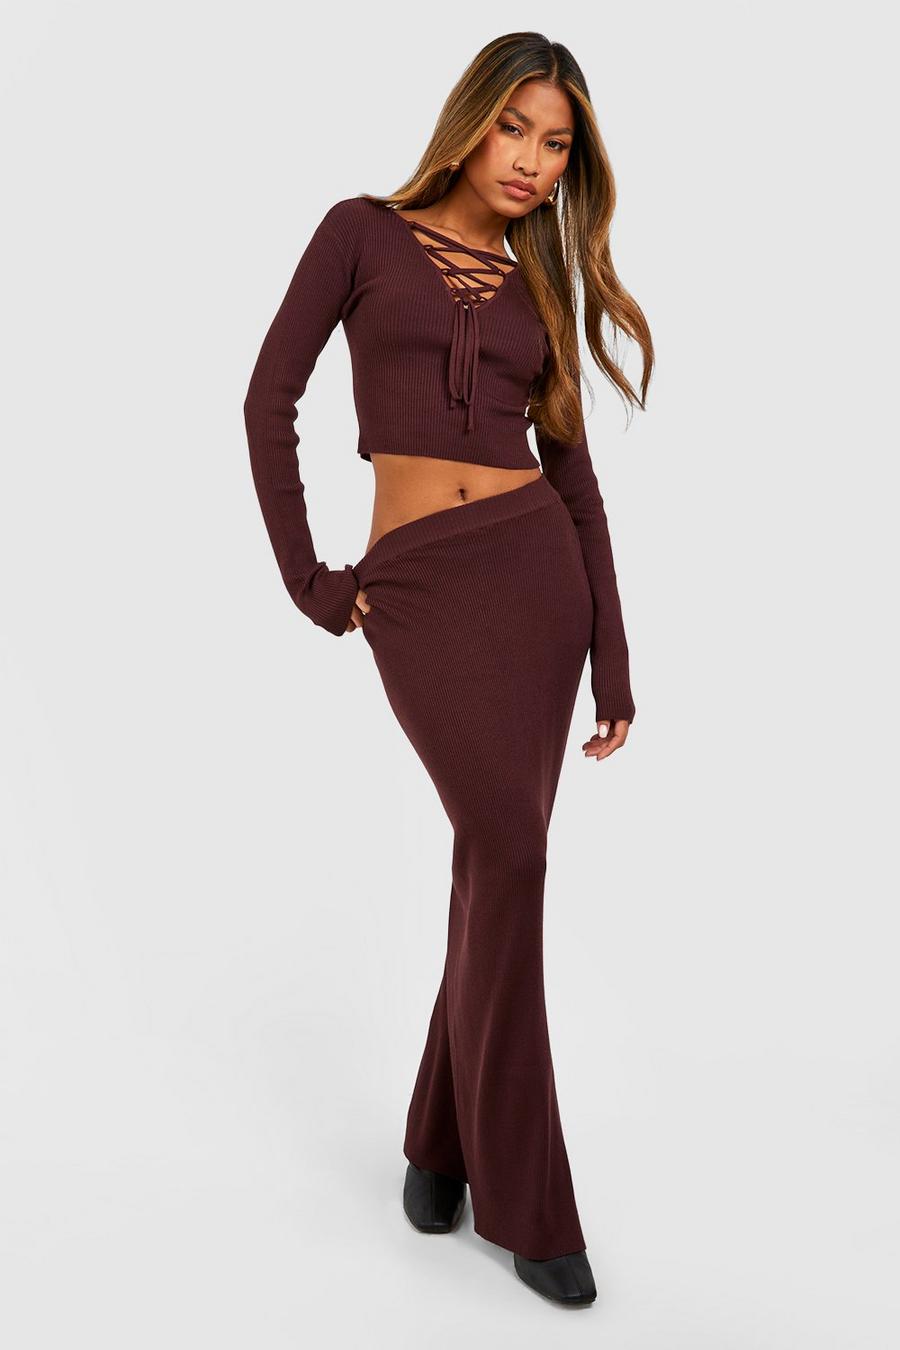 Chocolate Rib Knit Lace Up Top And Maxi Skirt Set